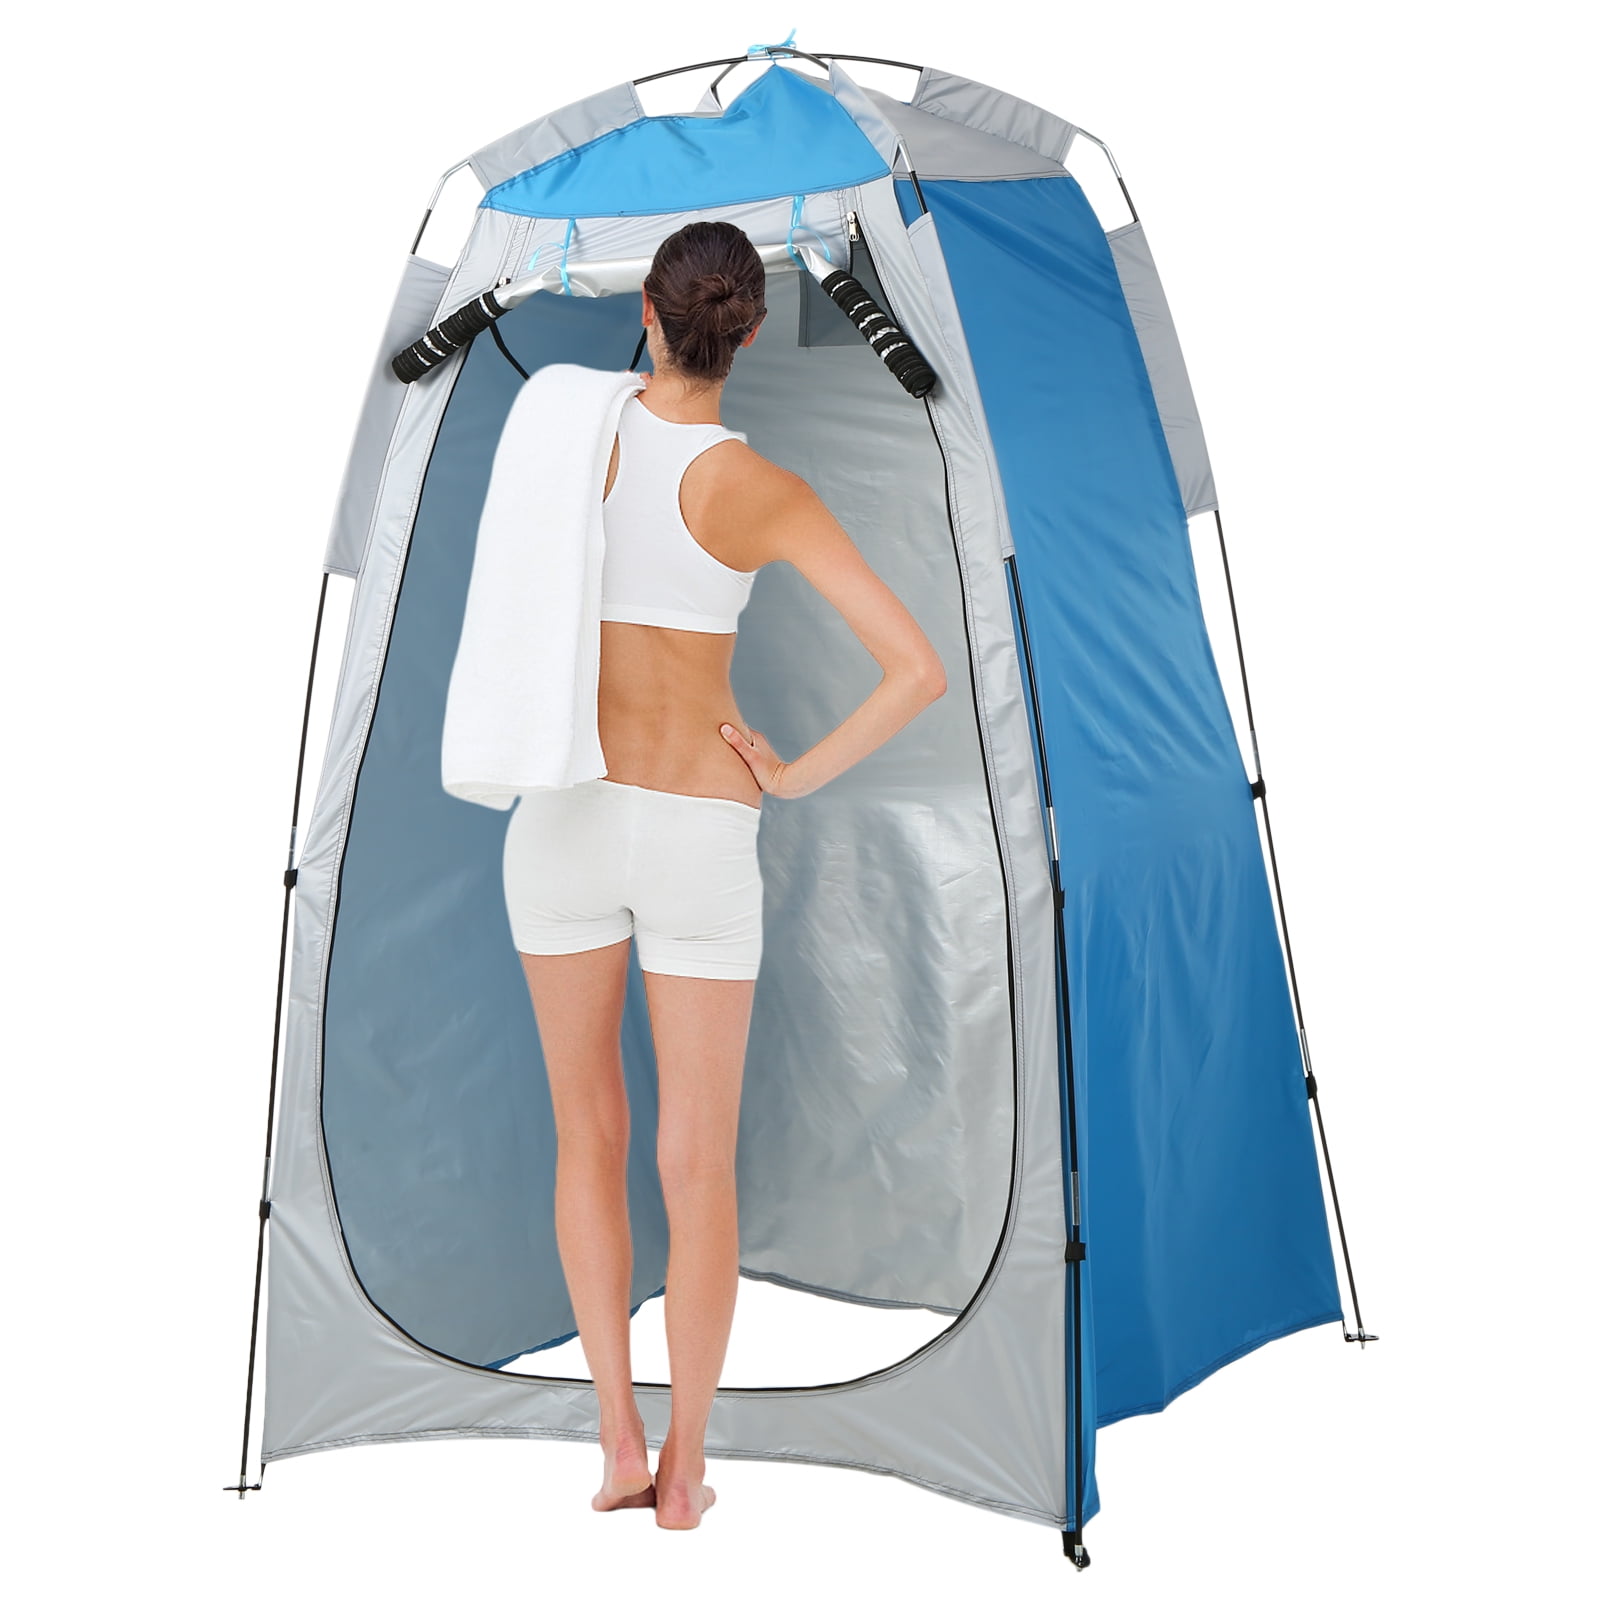 Details about   Outdoor Camping Tent Swimming Portable Bathroom Auto Open Shelter 1-2 Person 